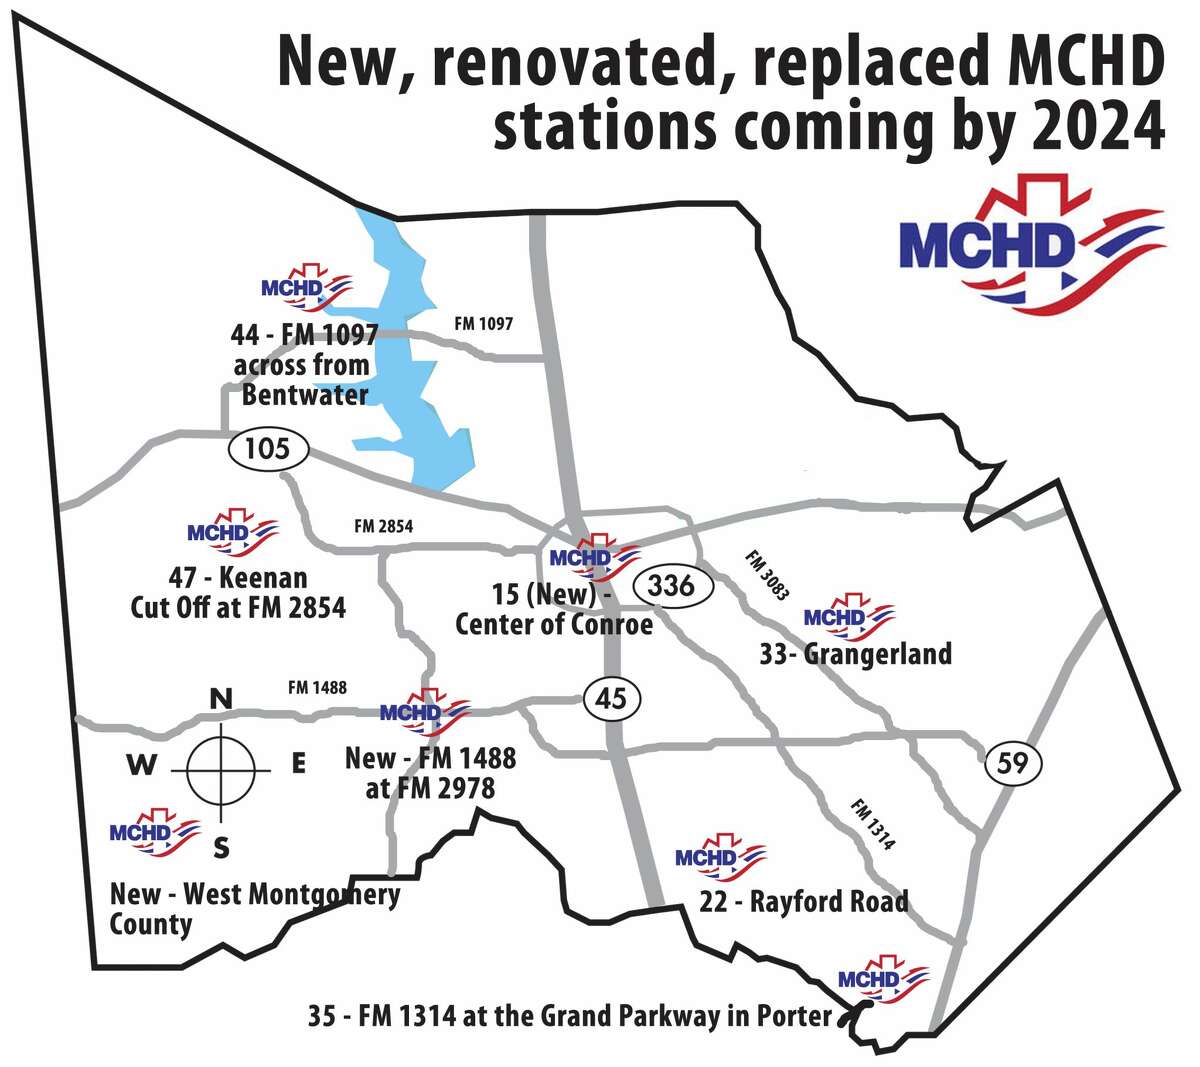 The hospital district is also replacing or renovating five more stations around the county — an almost-complete, $200,000 station in Montgomery, a station in Grangerland projected to cost less than $800,000 completed by 2021, a $1.2 million replacement of Station 44 in Bentwater projected to be completed by 2020, renovations totaling $800,000 to Station 35 in Porter by 2020 and a $720,000 Station 22 in the south county off of Rayford Road.>>See more for a ranking of the best hospitals in Houston...